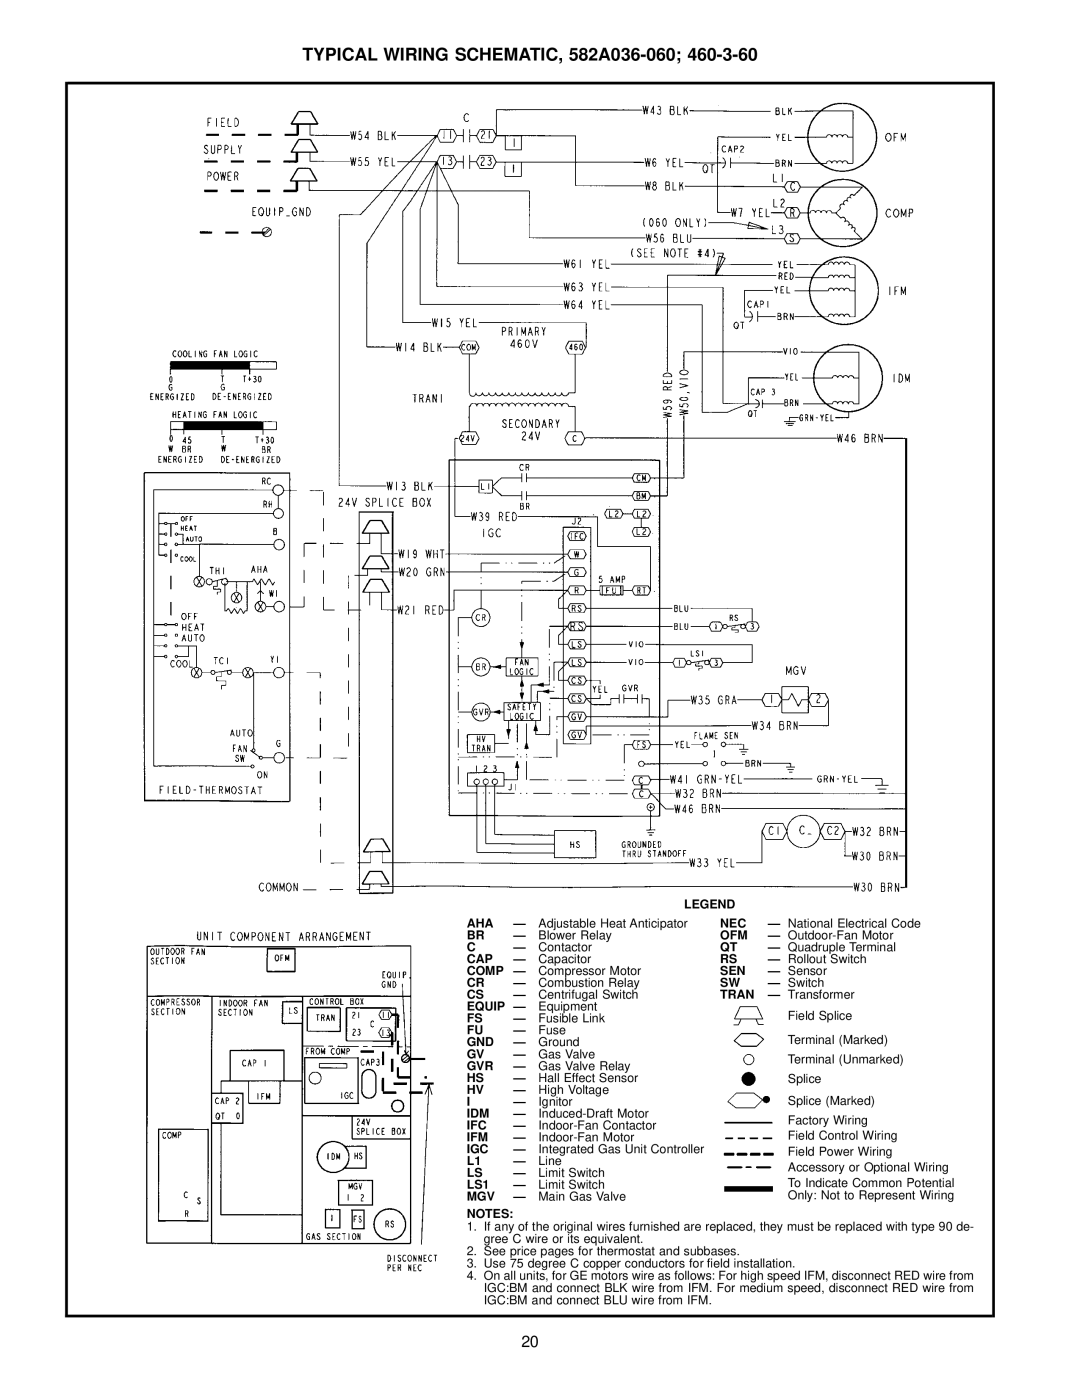 Bryant manual TYPICAL WIRING SCHEMATIC, 582A036-060 